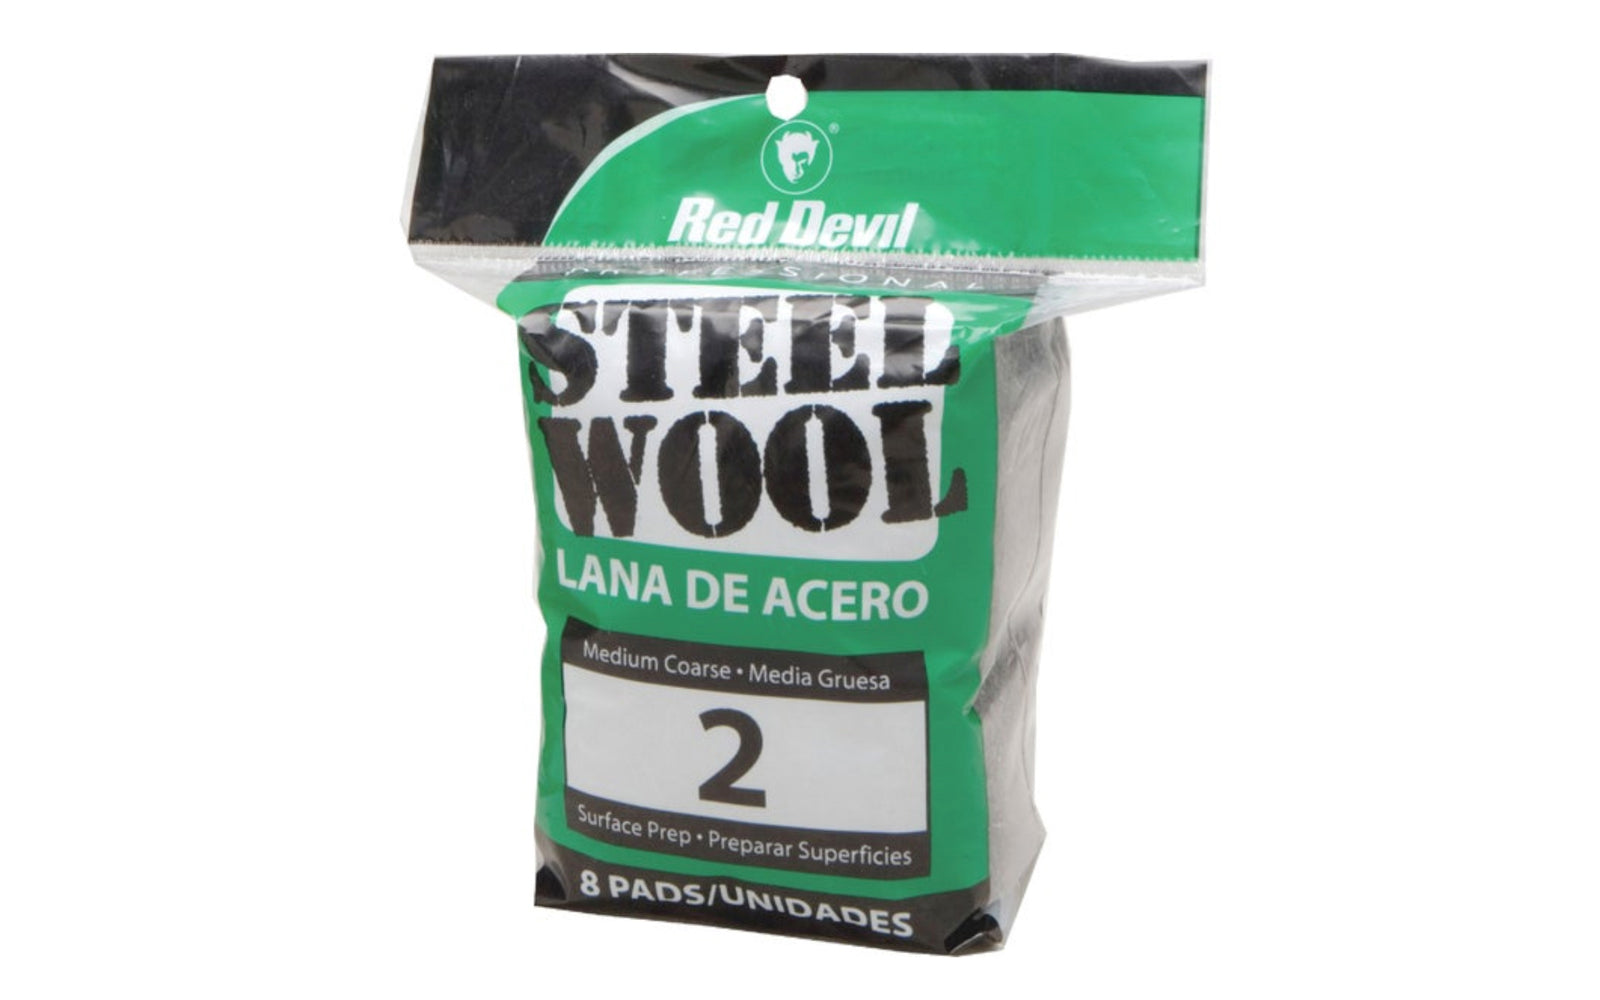 Red Devil #2 Medium Coarse Steel Wool - 8 Pack. General purpose use steel wool. Good for surface preparation, removing scratches & burrs from brass & copper, removing paint from moldings & corners, removing lacquer & varnish finishes, removing paint from glass & tile, etc.  Made by Red Devil, Inc.